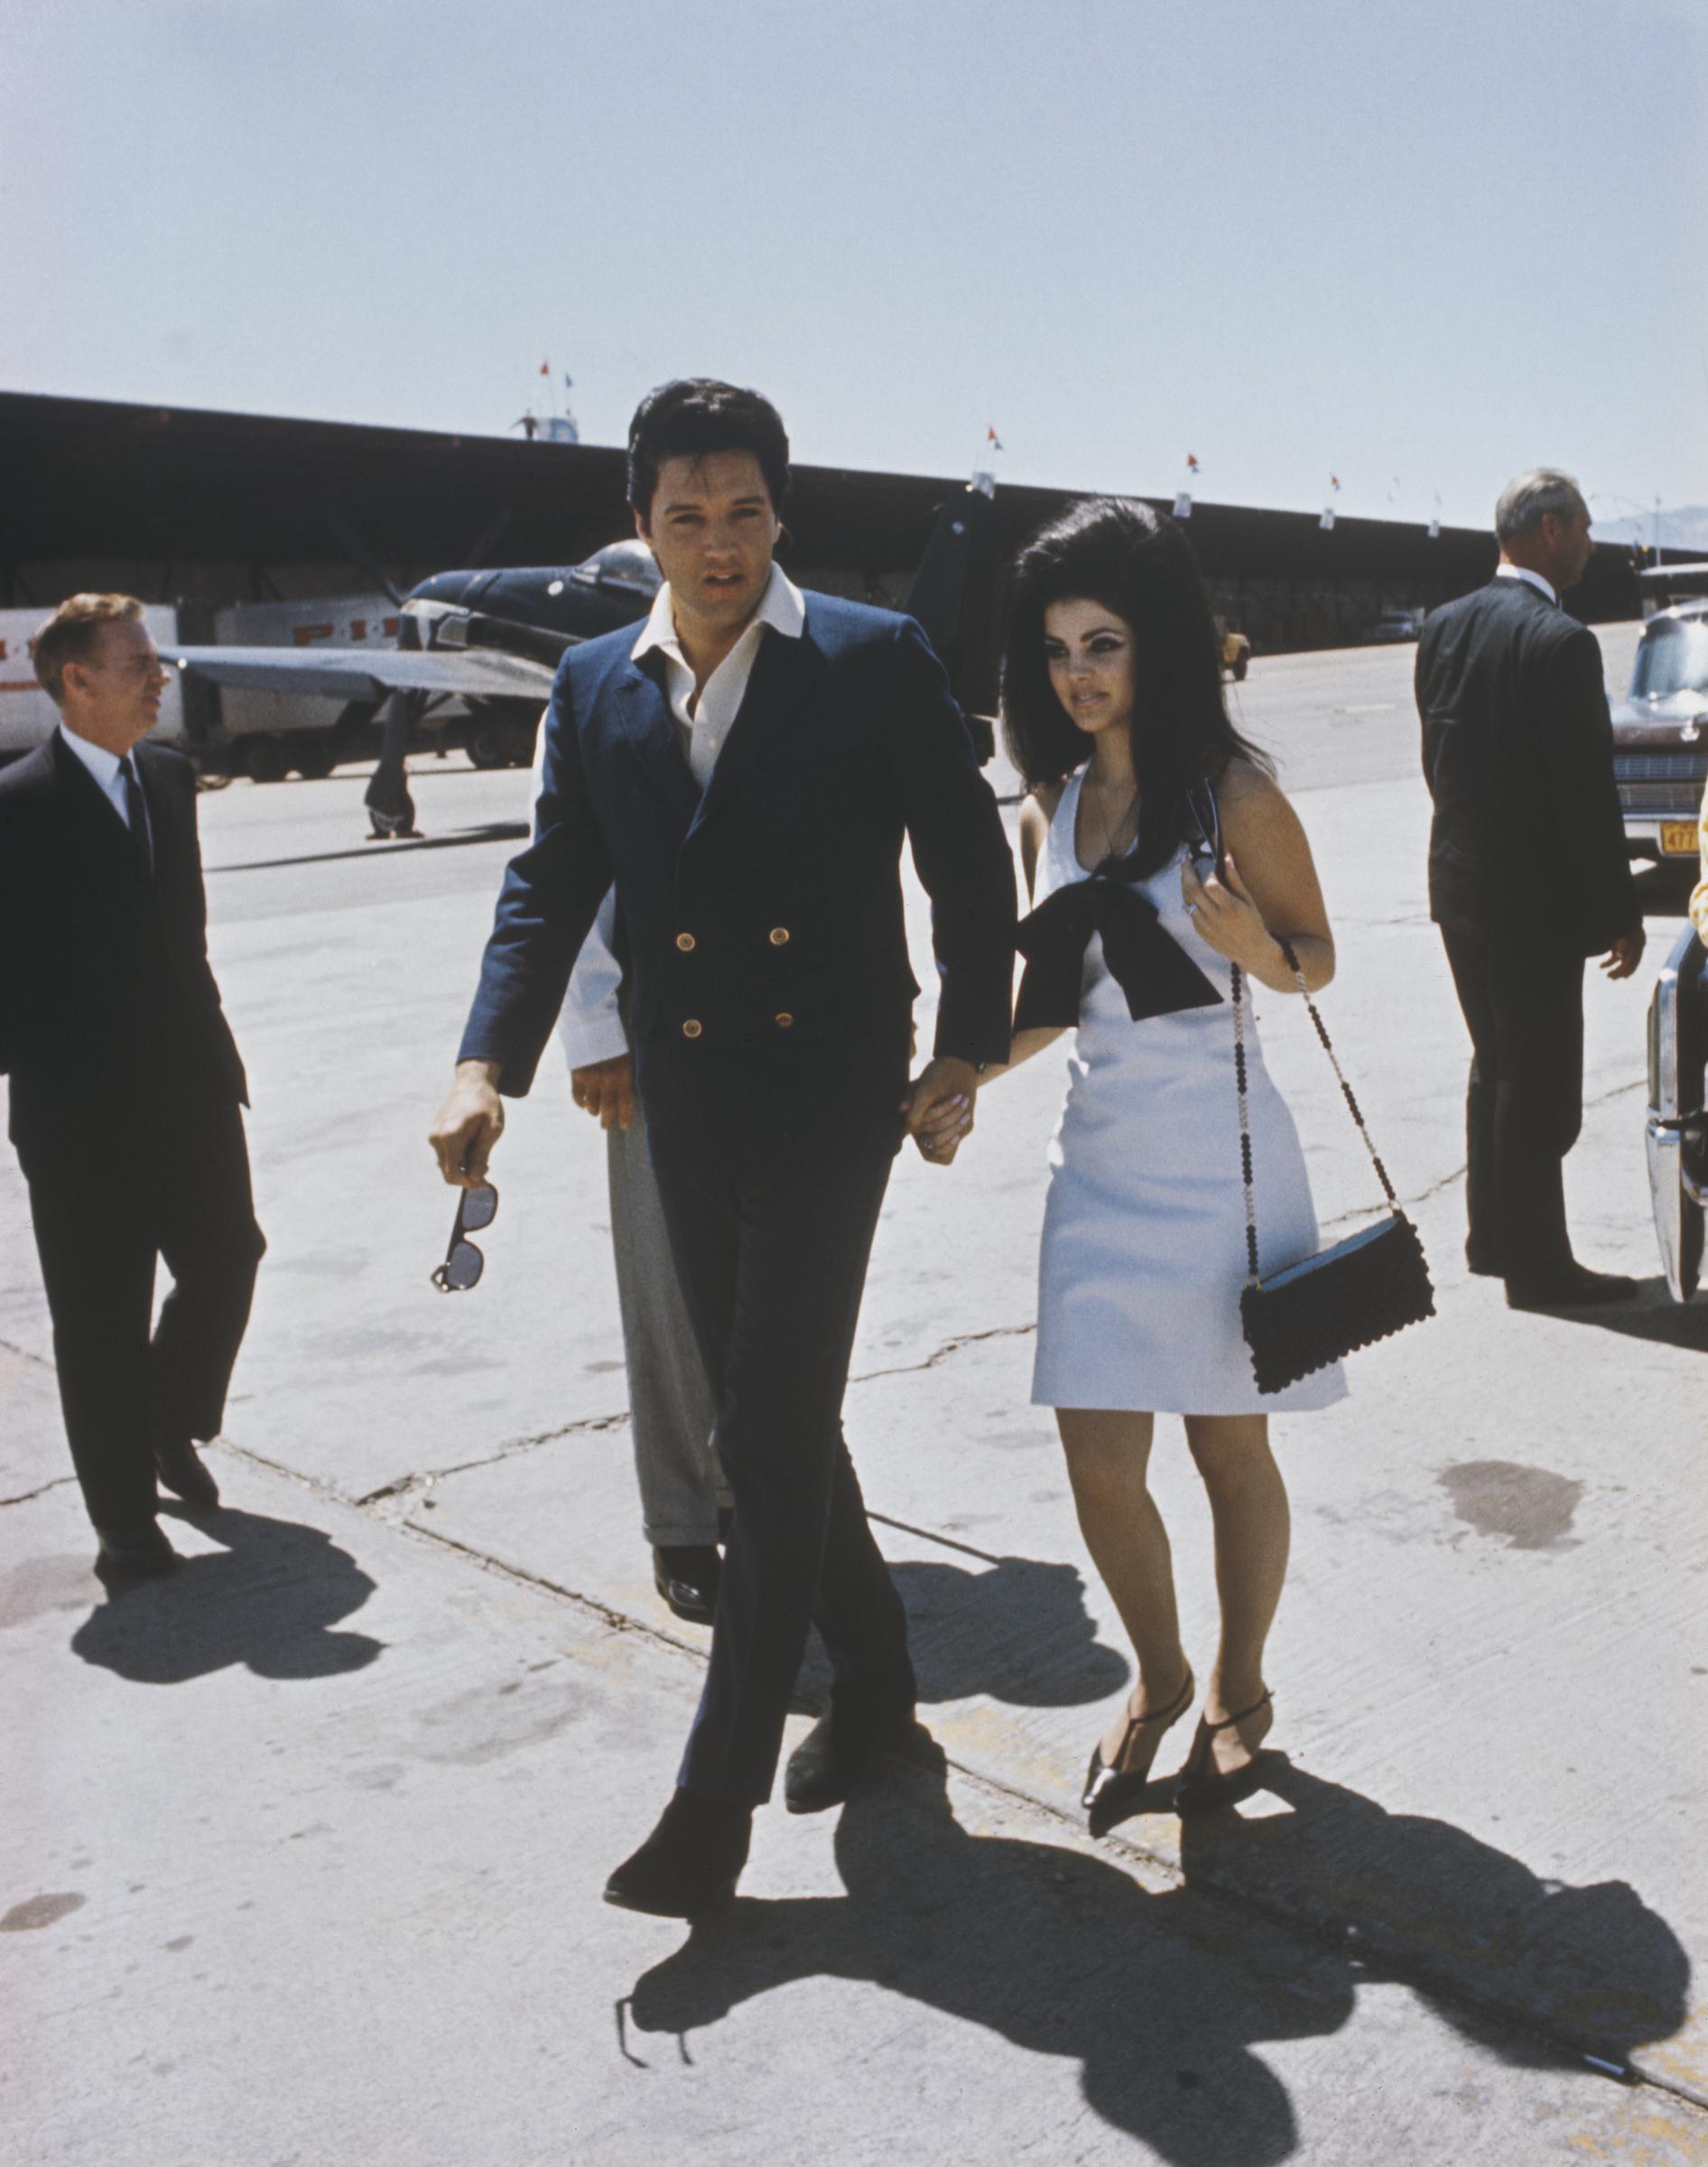 Elvis and Priscilla Presley seen at an airport on May 1, 1967, during their honeymoon journey from Las Vegas, Nevada to Palm Springs, California. | Source: Getty Images